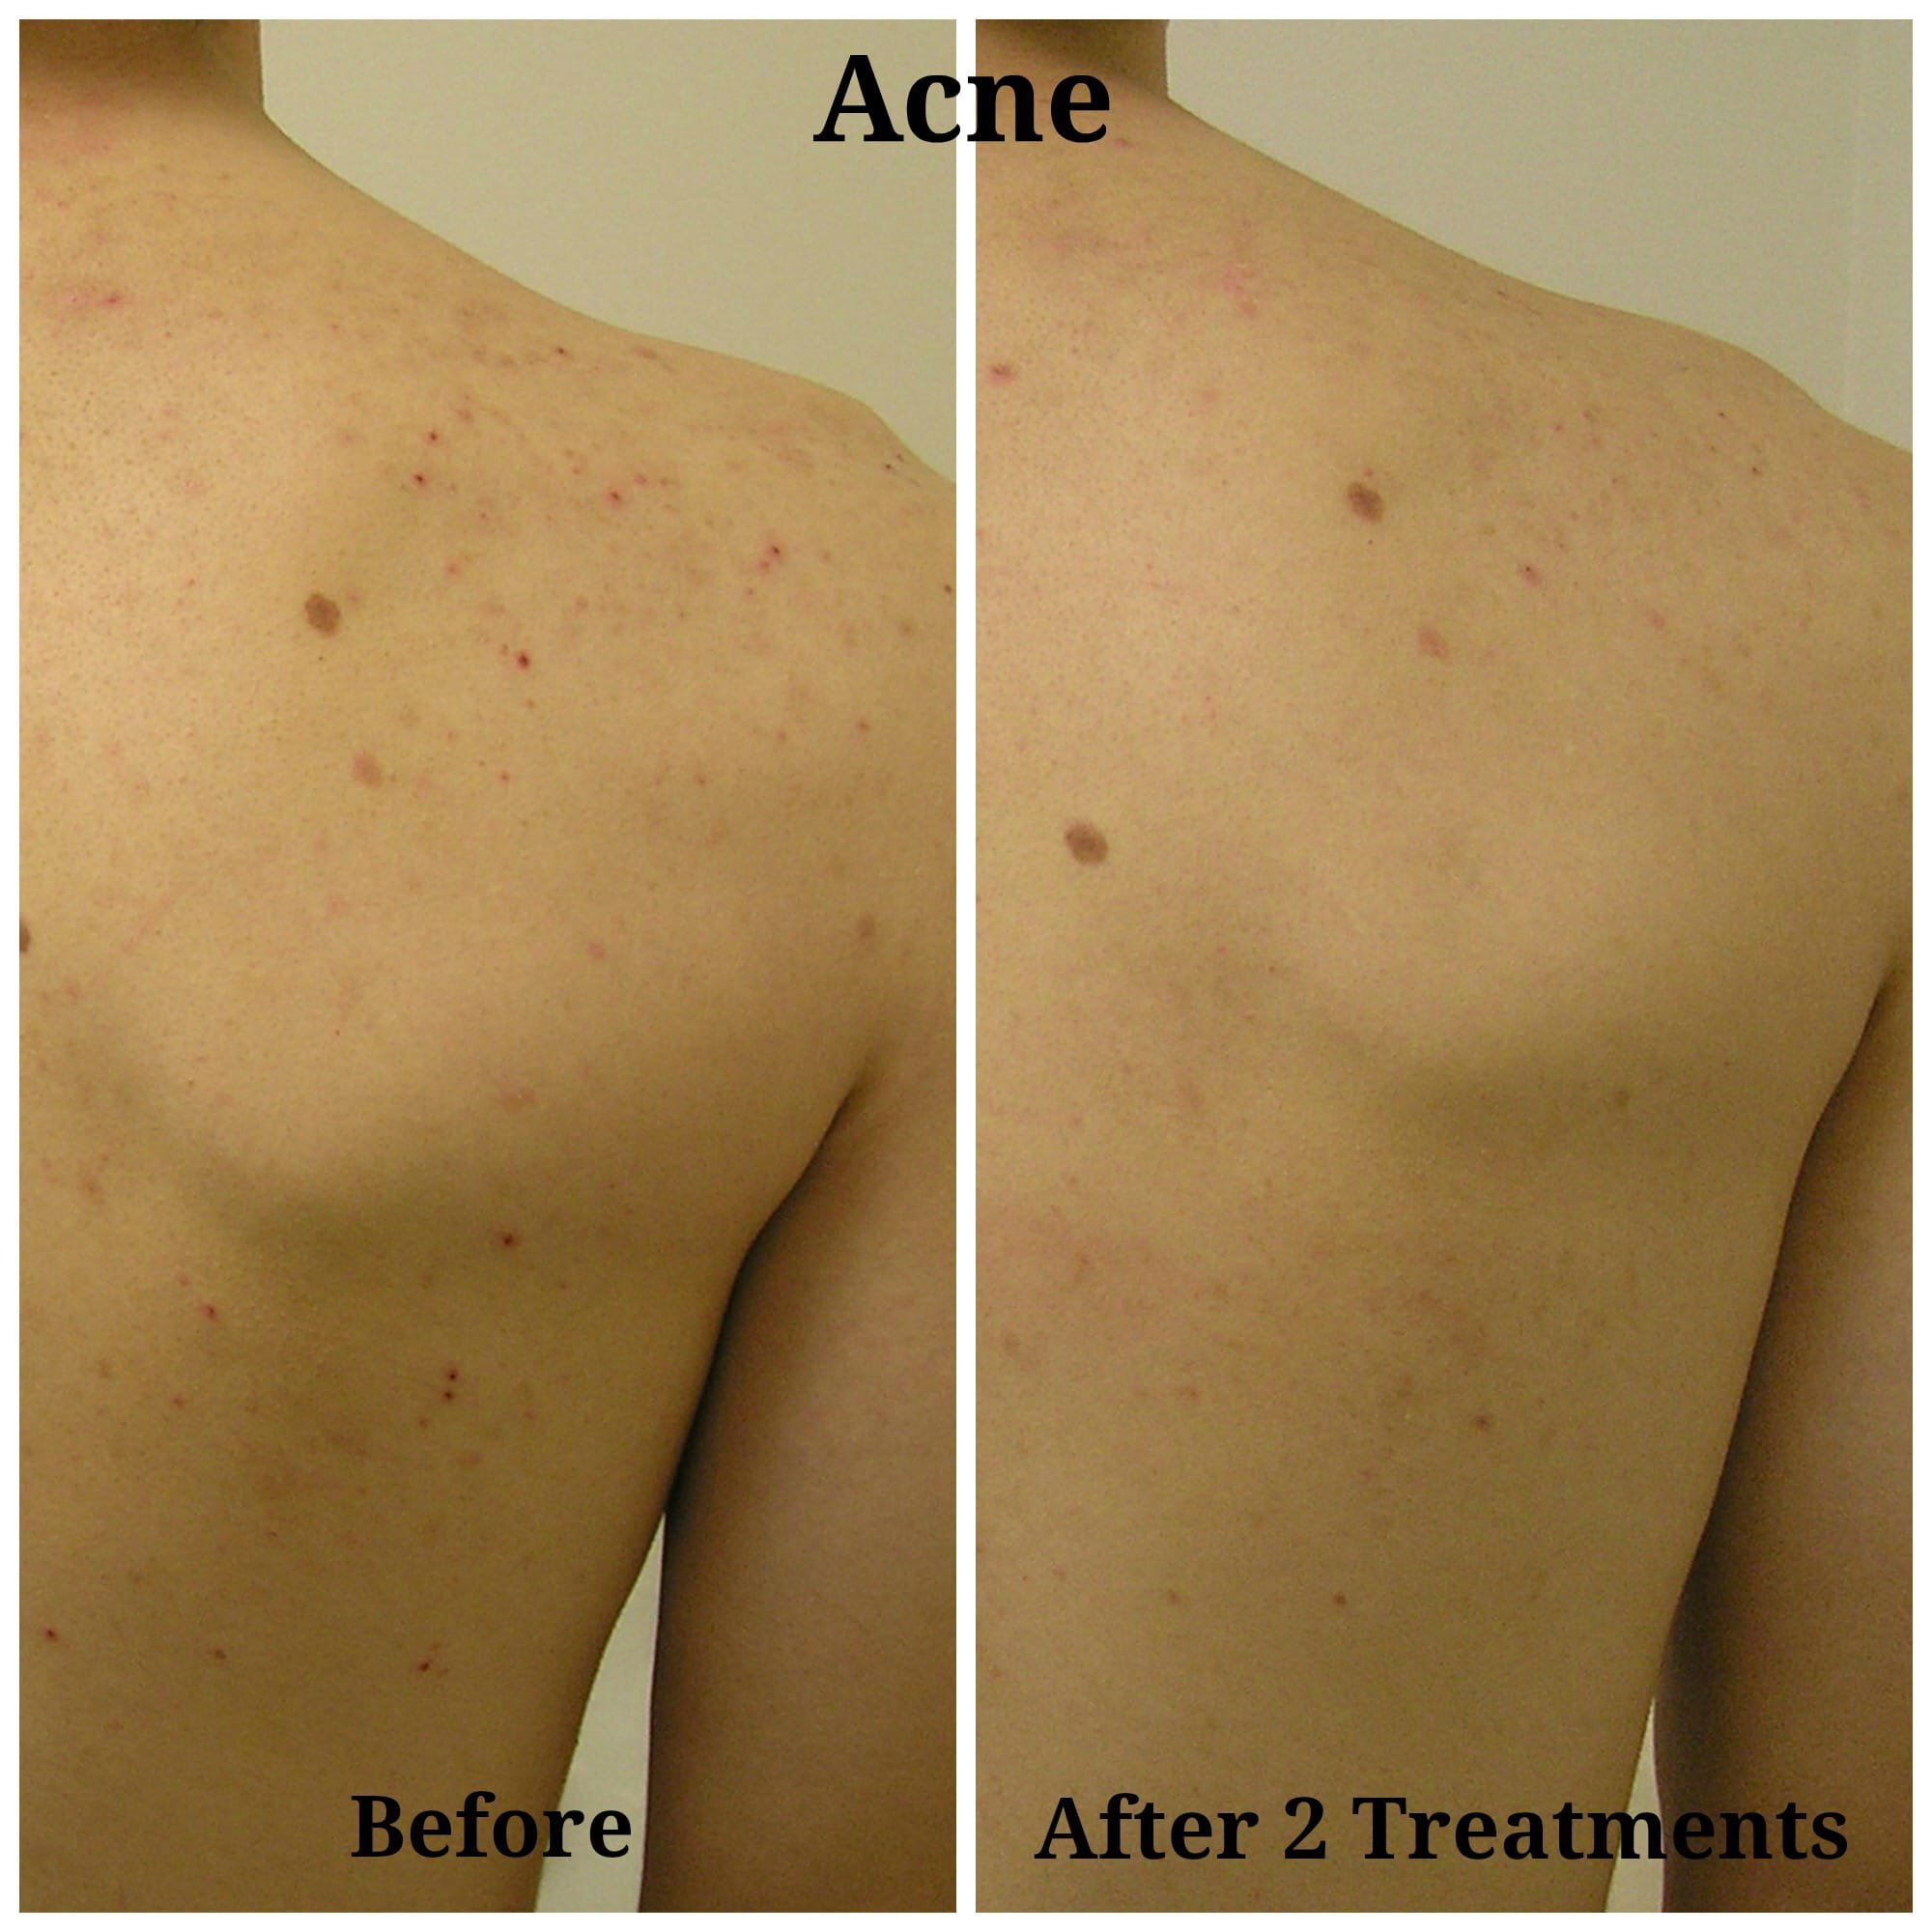 Newtown HydraFacial patient for acne treatment before and after